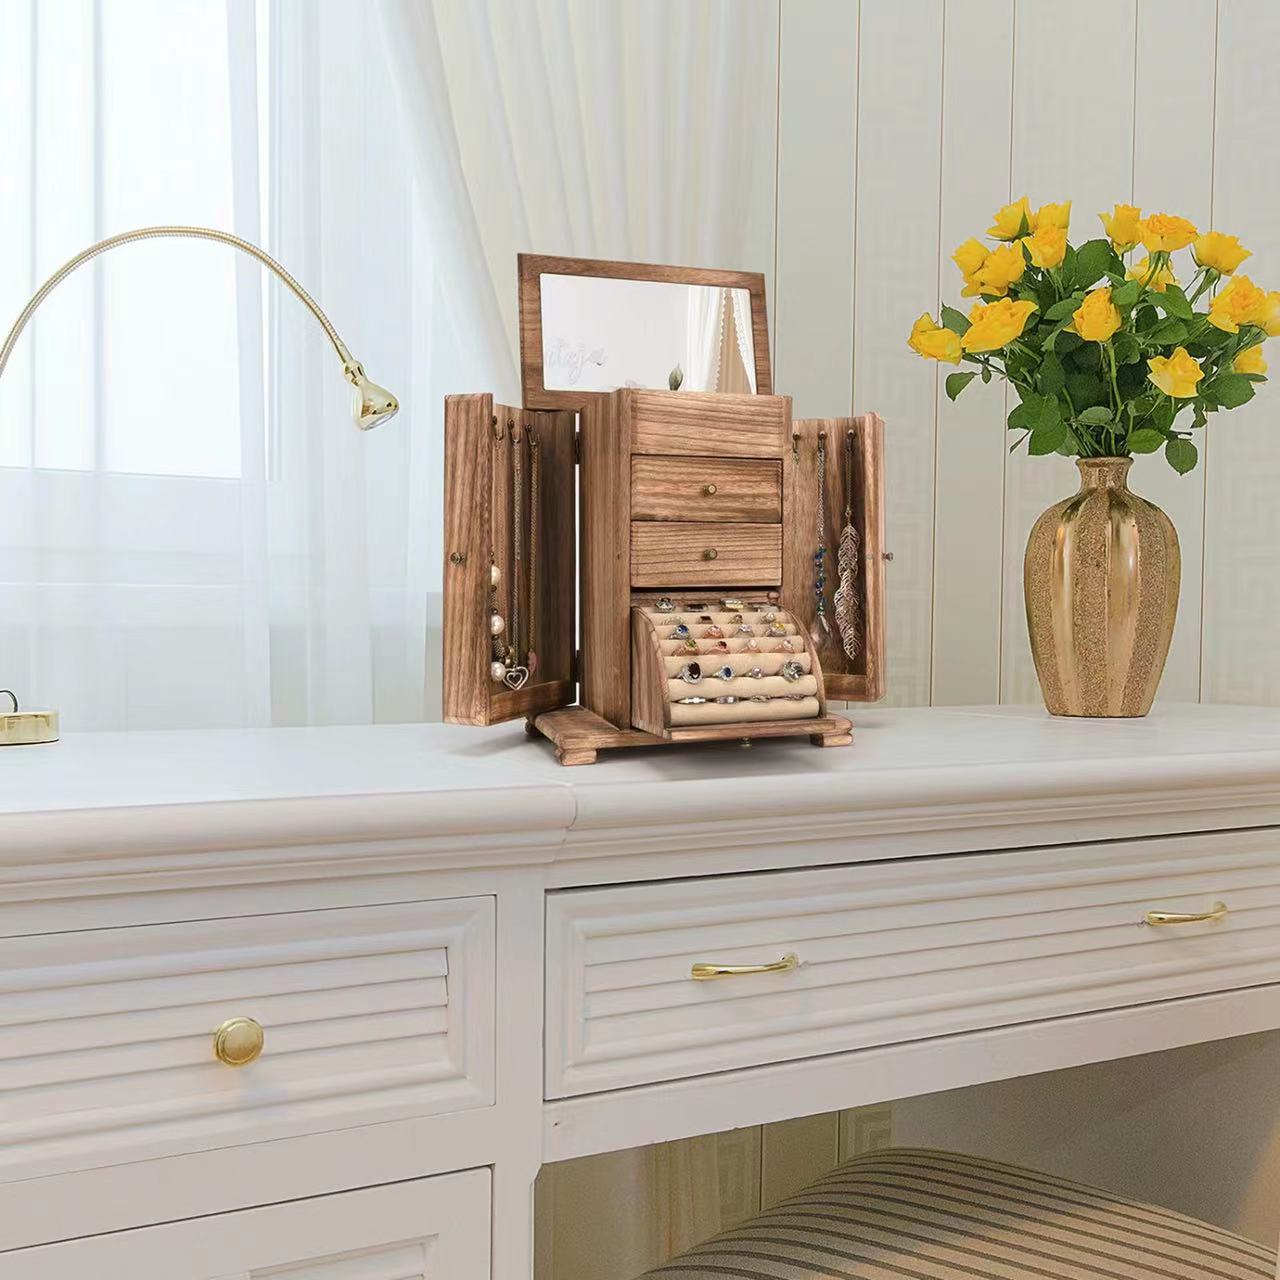 Large Wooden Jewelry Boxes & Organizers For Women With Drawers And Mirror SKU 21055